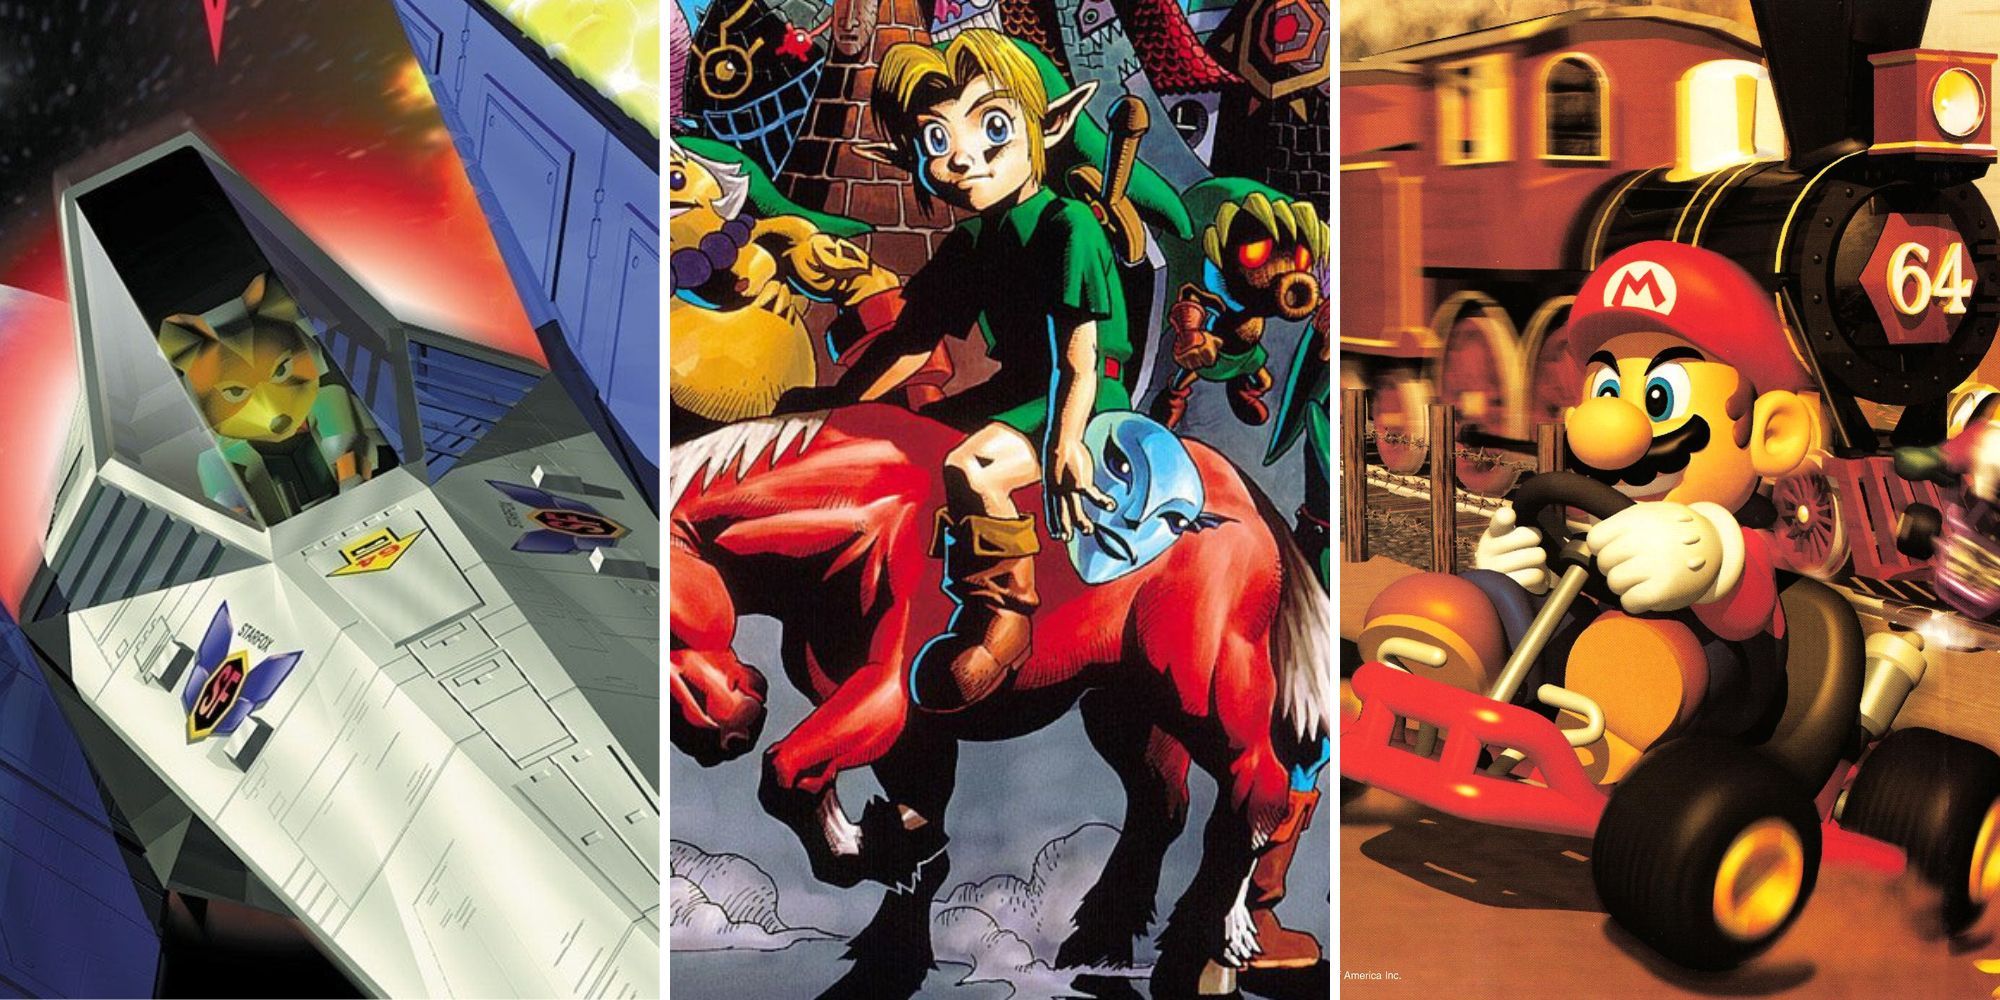 Fox drives the Arwing through space, Link holds a mask while riding Epona, Mario drives his kart past a train